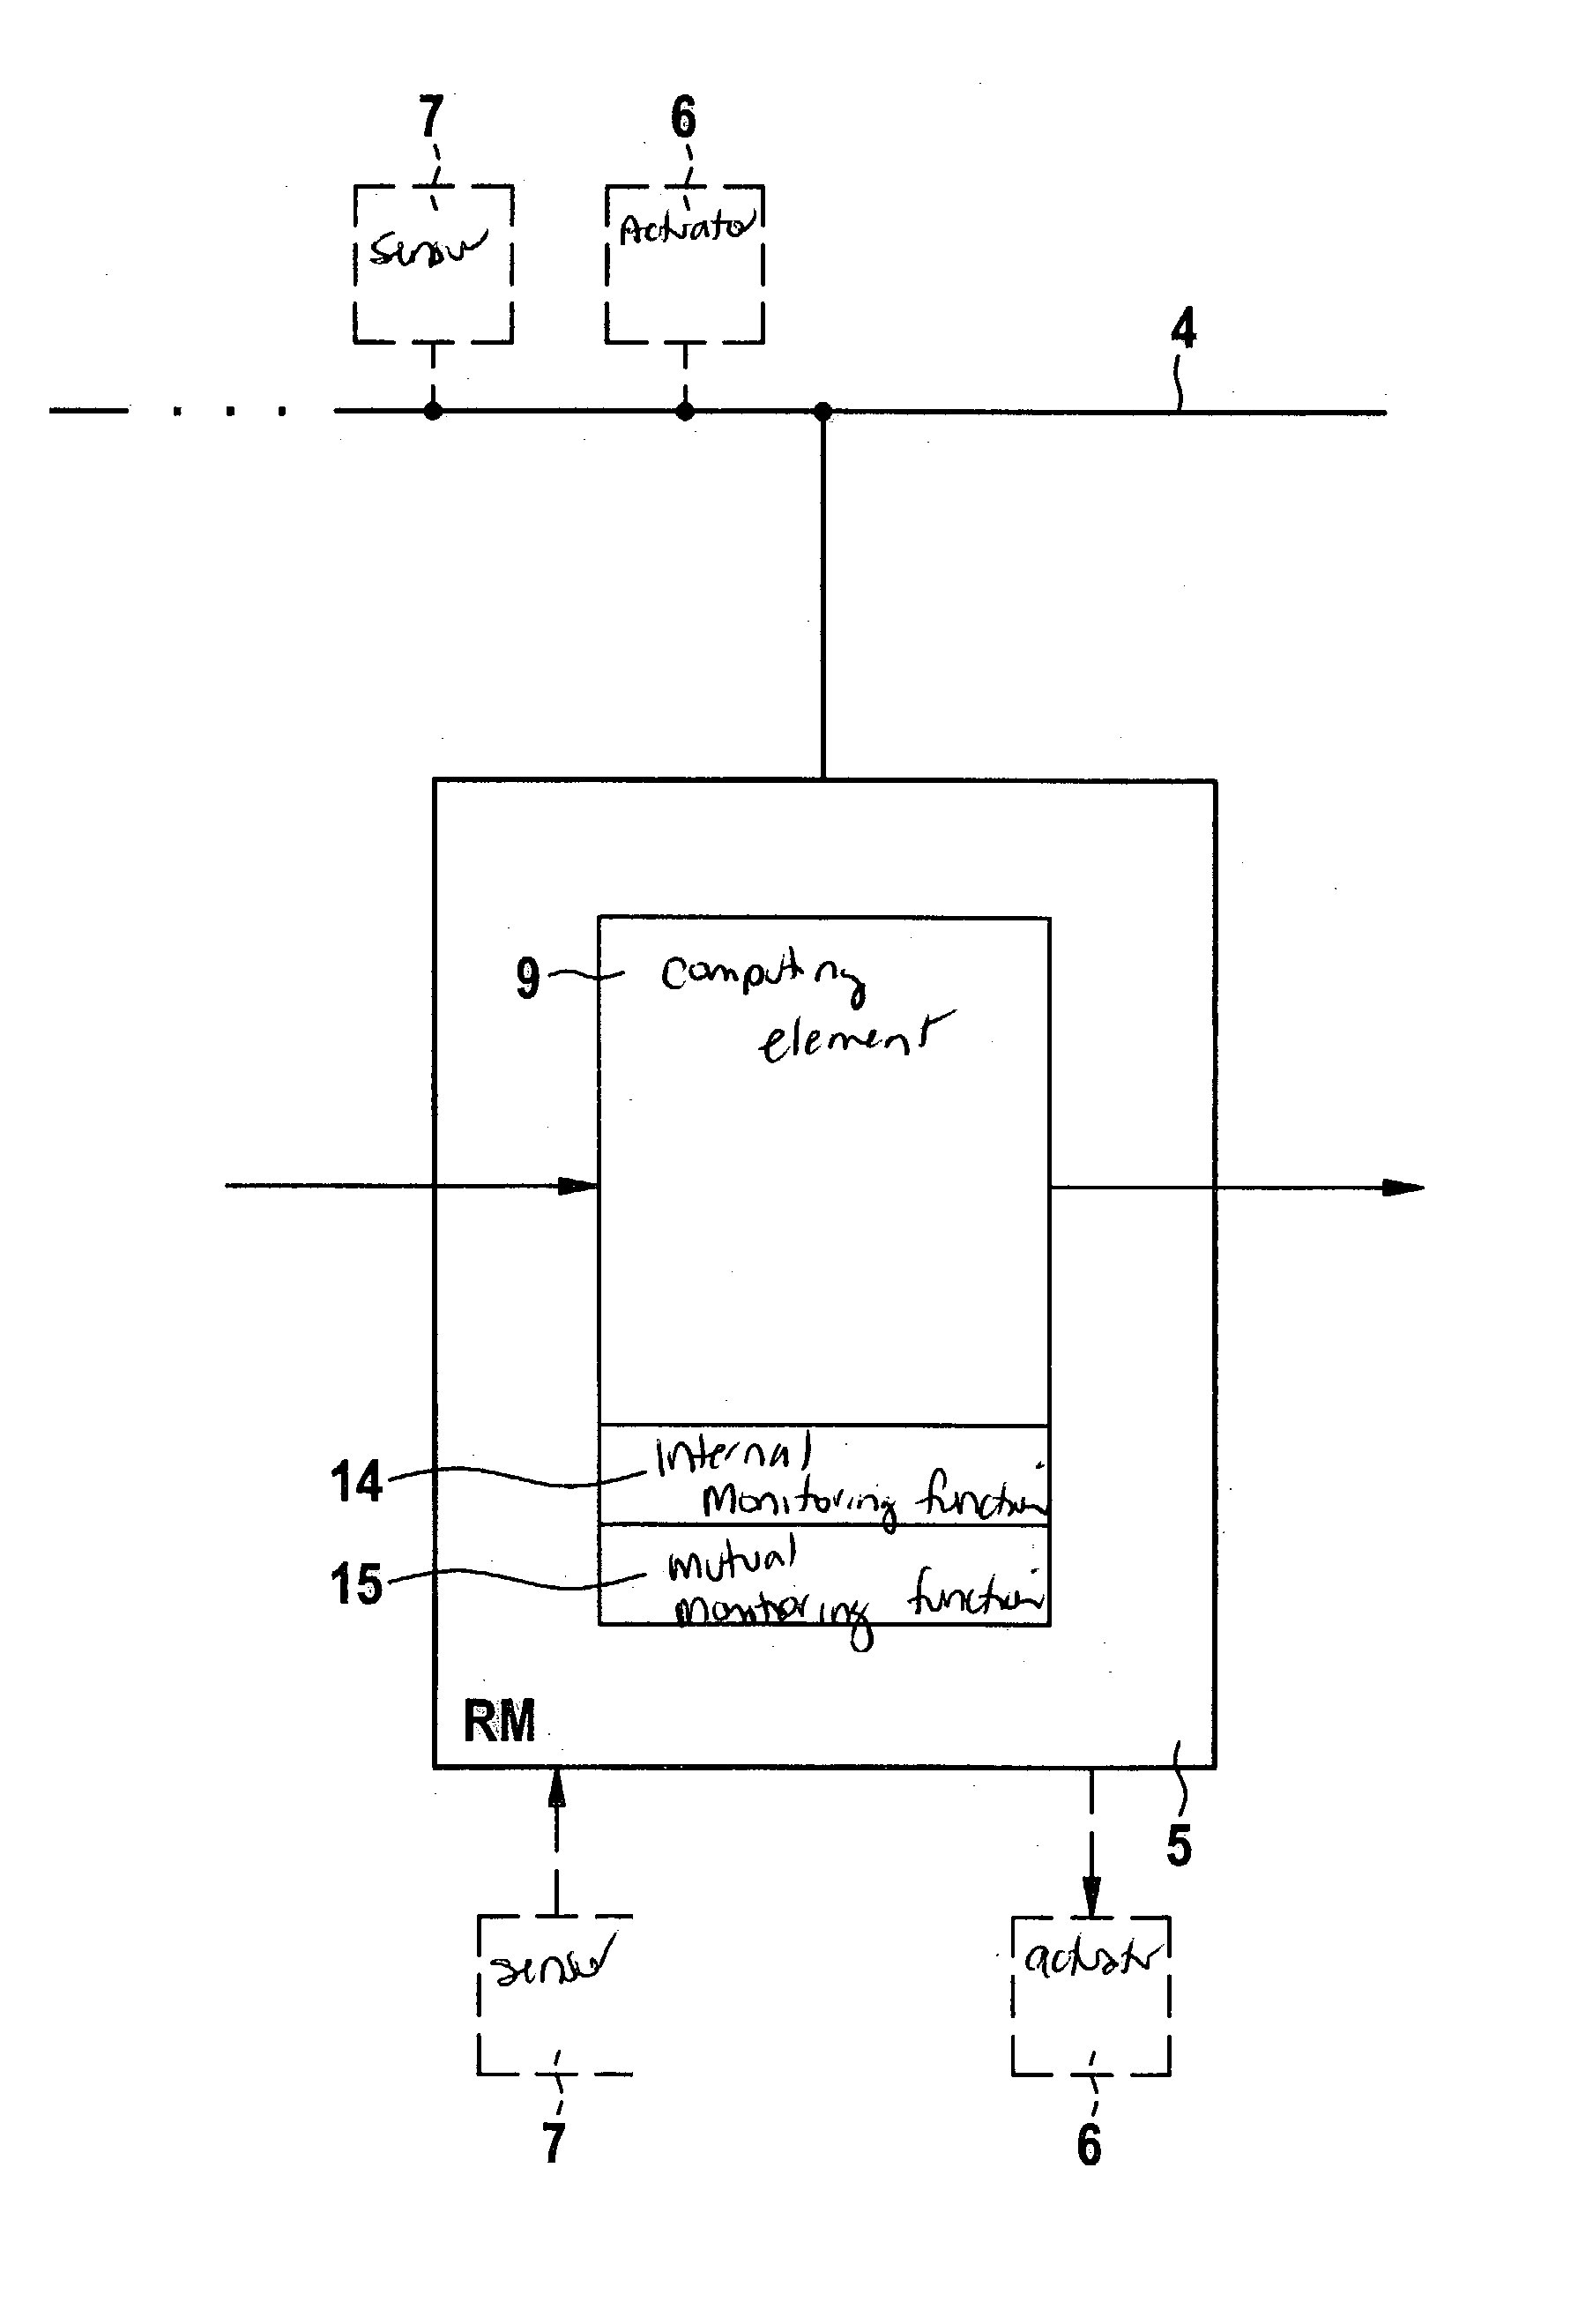 Method for mutual monitoring of components of a distributed computer system